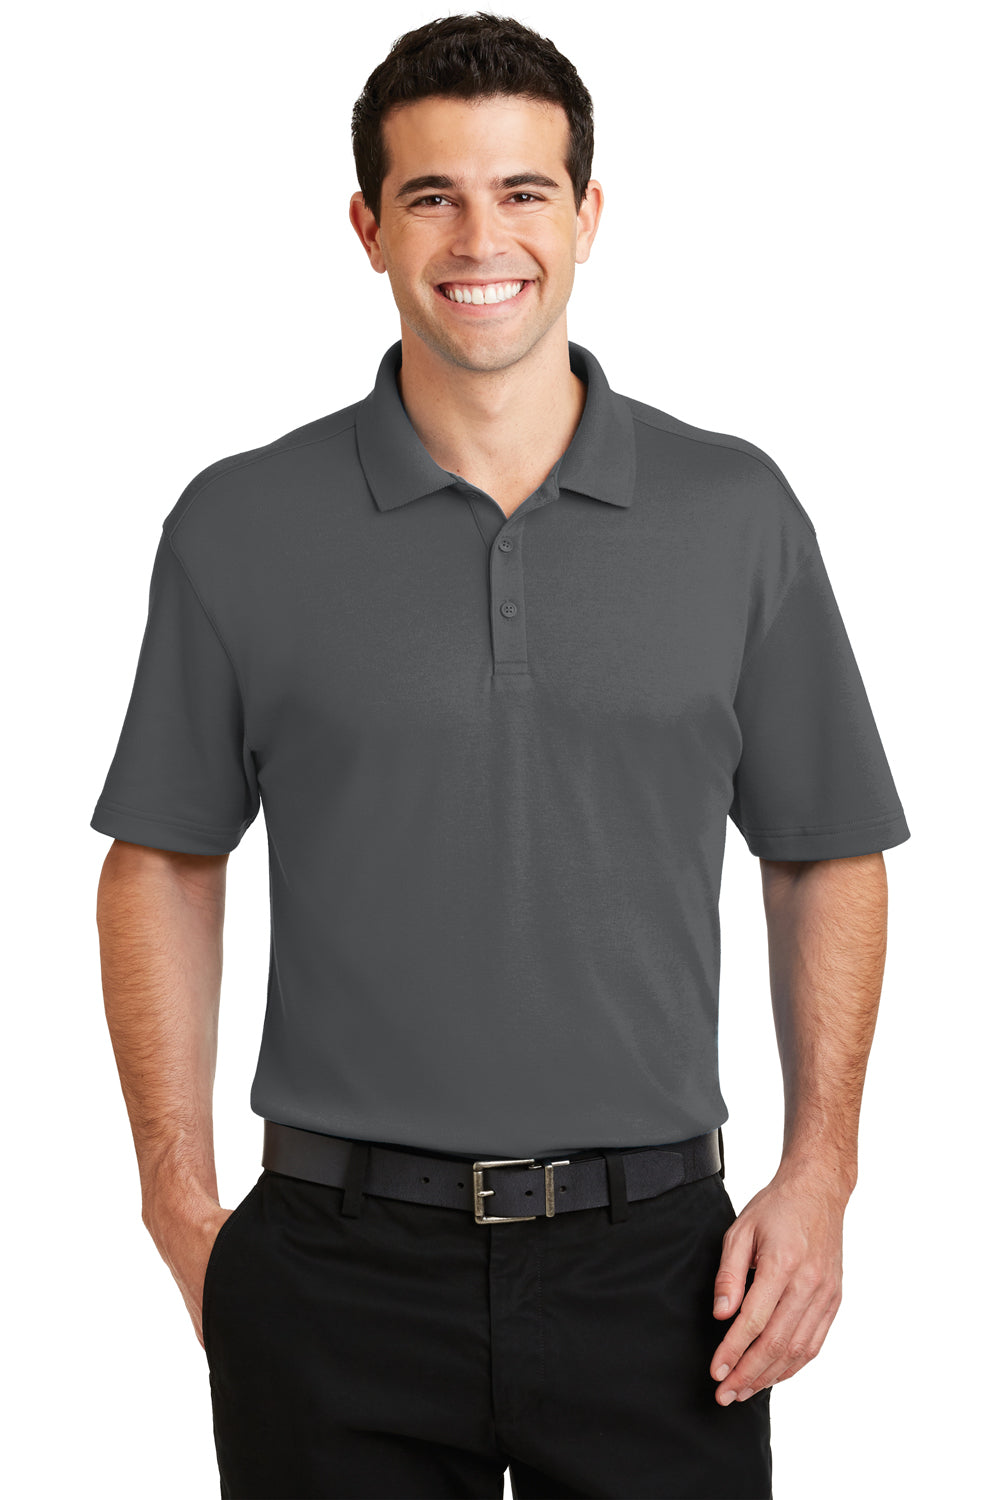 Port Authority K5200 Mens Silk Touch Performance Moisture Wicking Short Sleeve Polo Shirt Sterling Grey Front